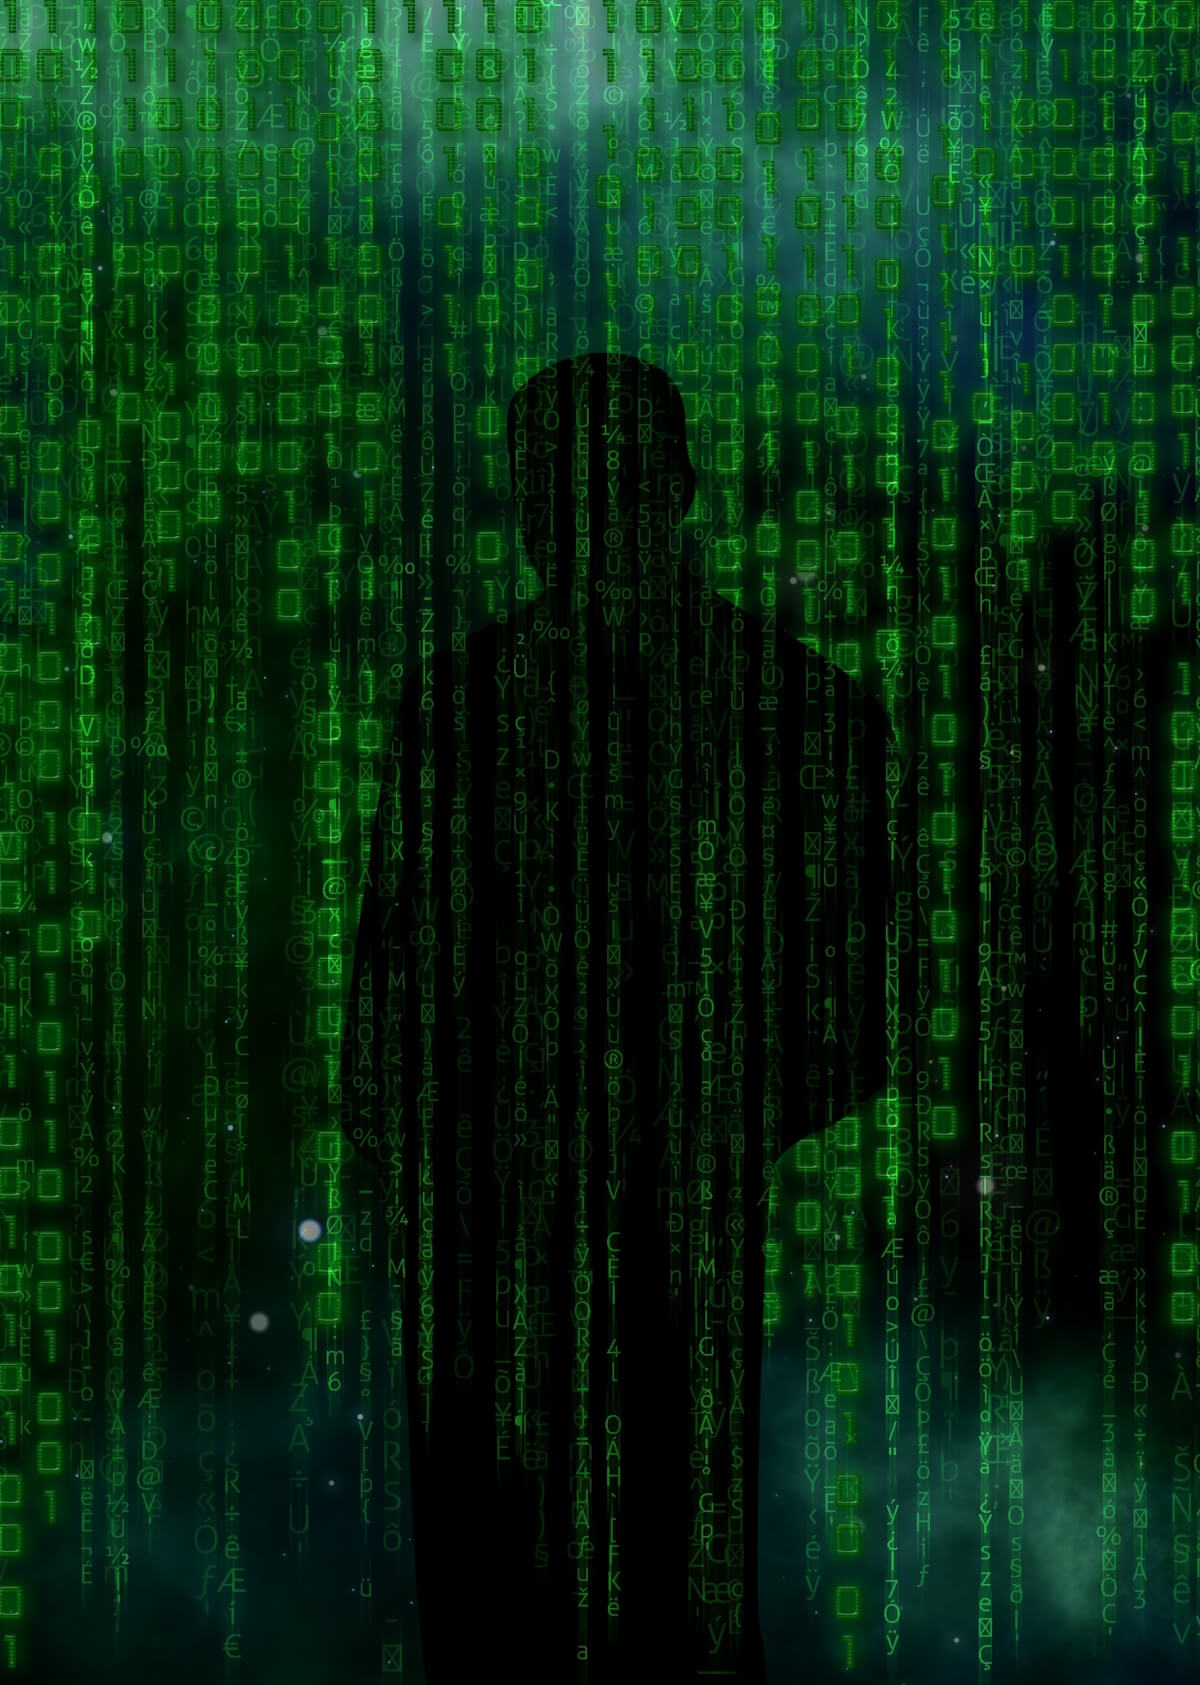 Matrix style picture of hacker behind code